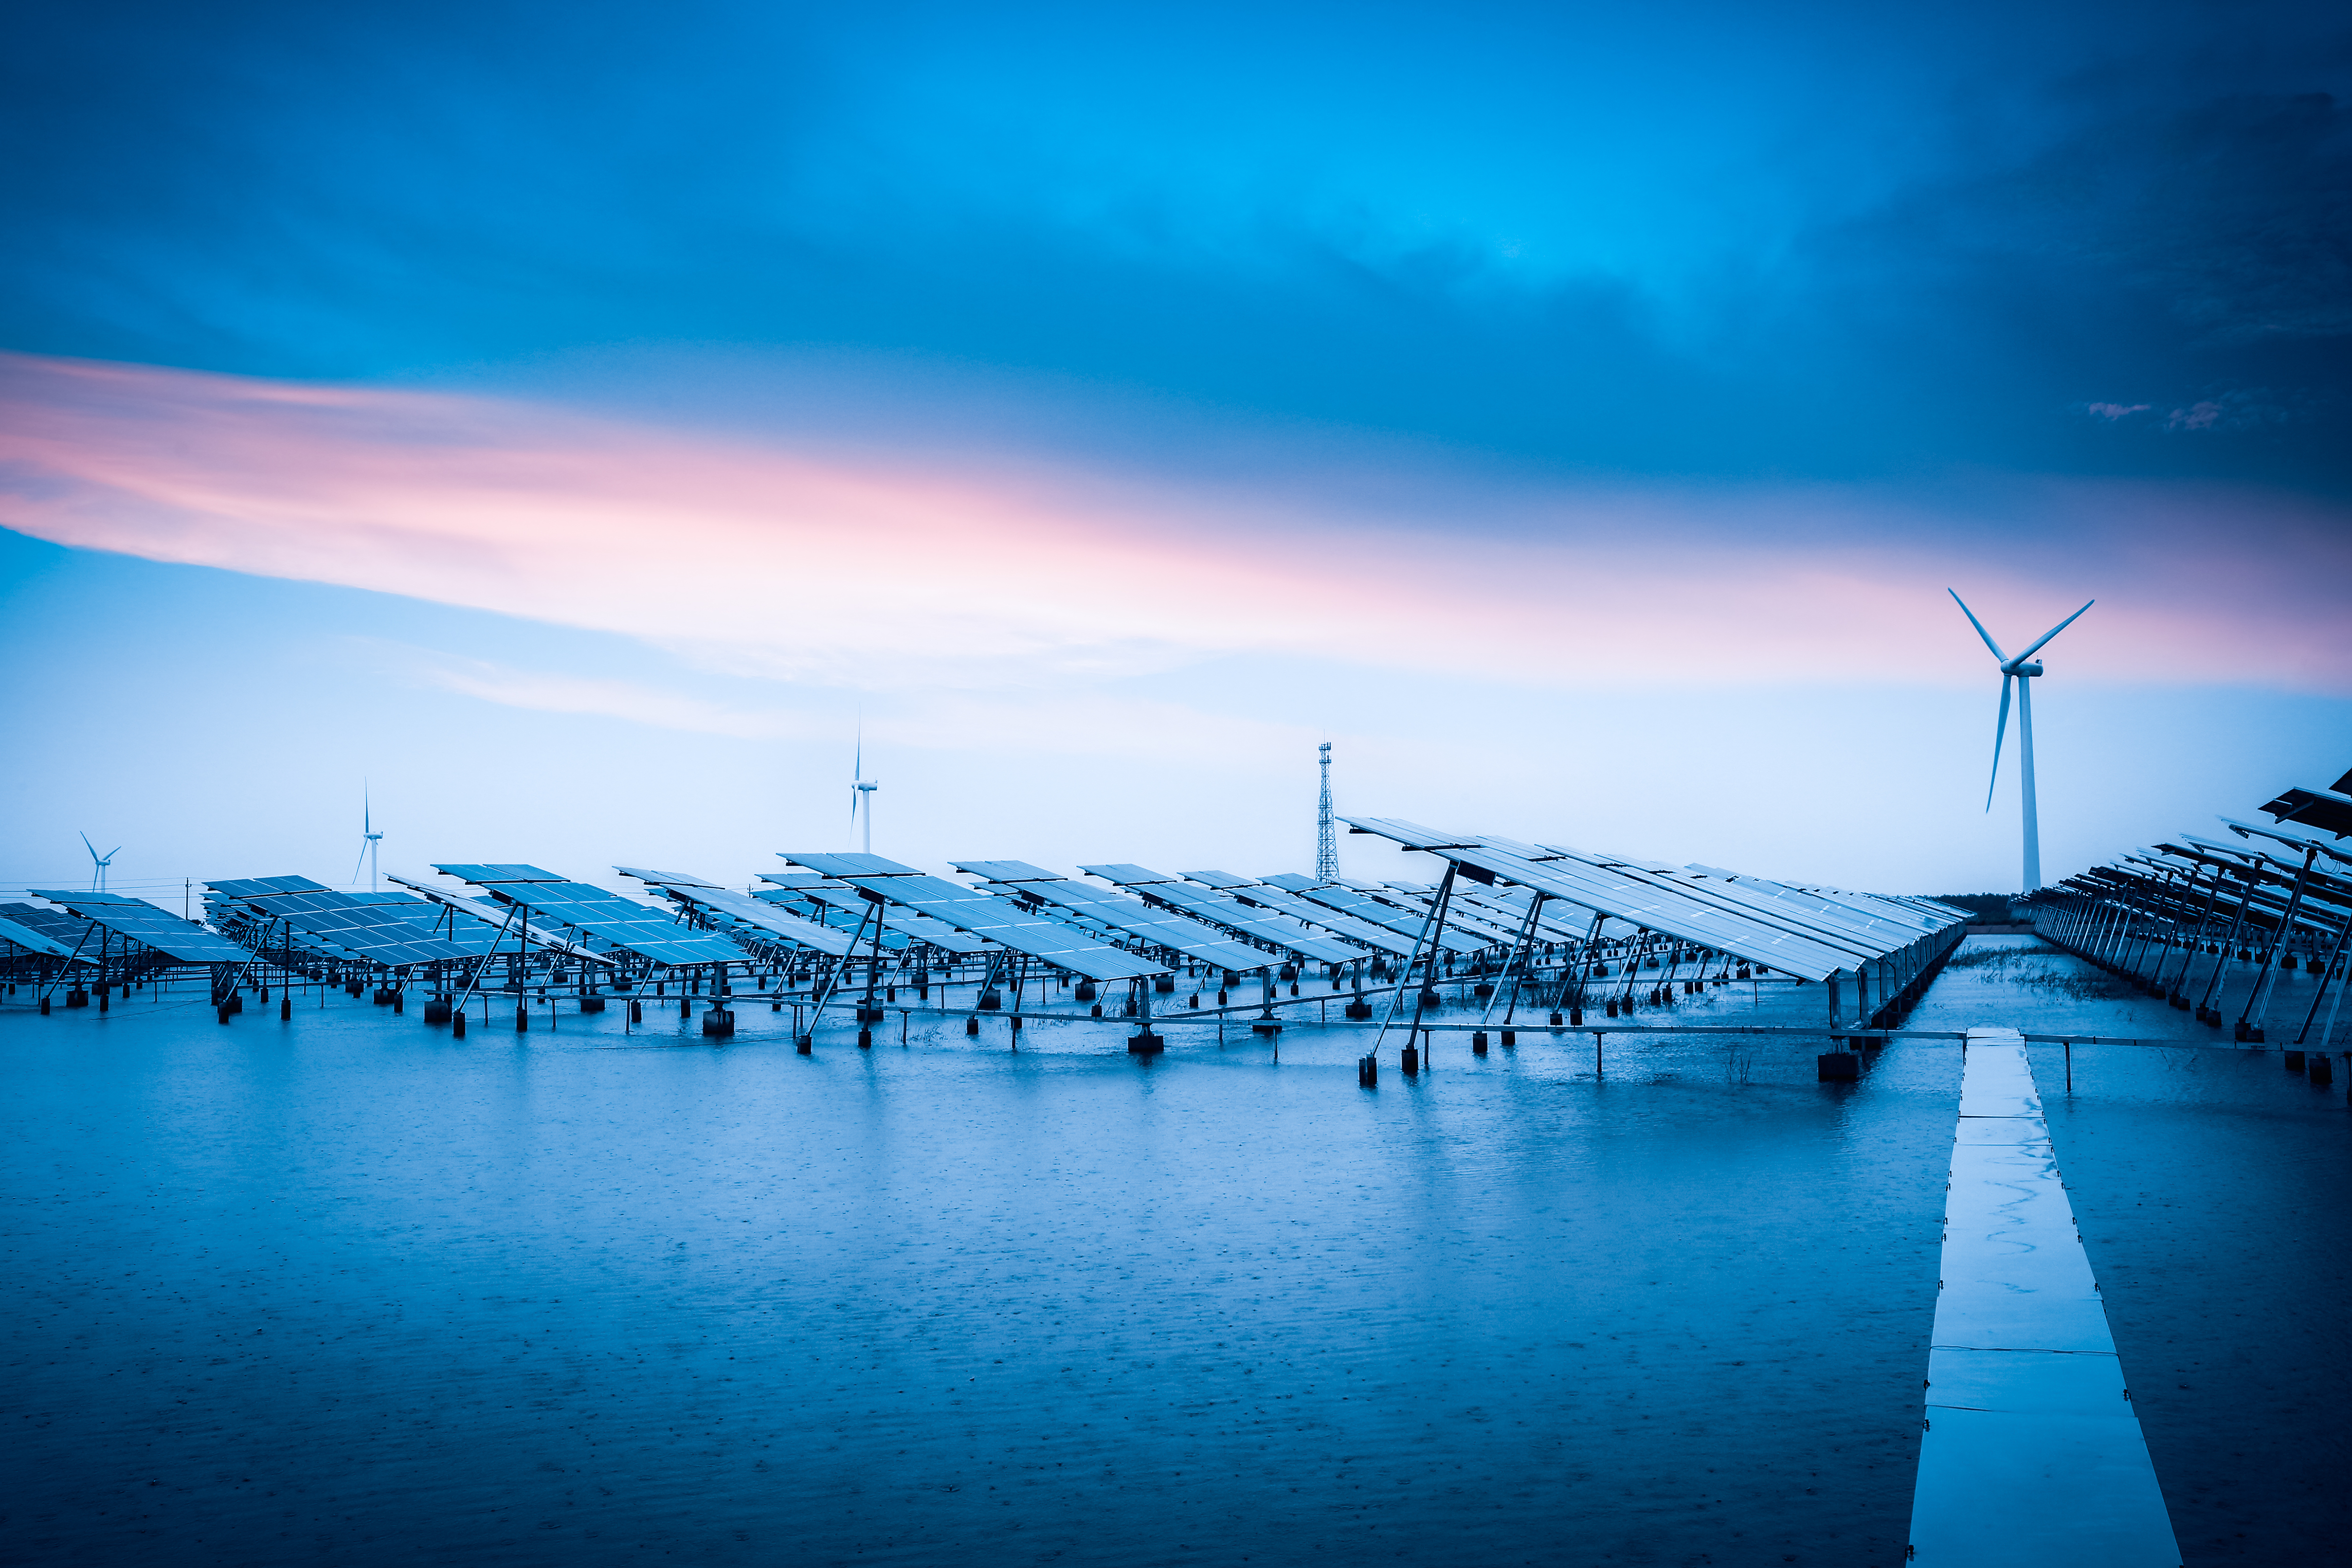 Embedded renewable energy and storage assets are disrupting the power generation market.